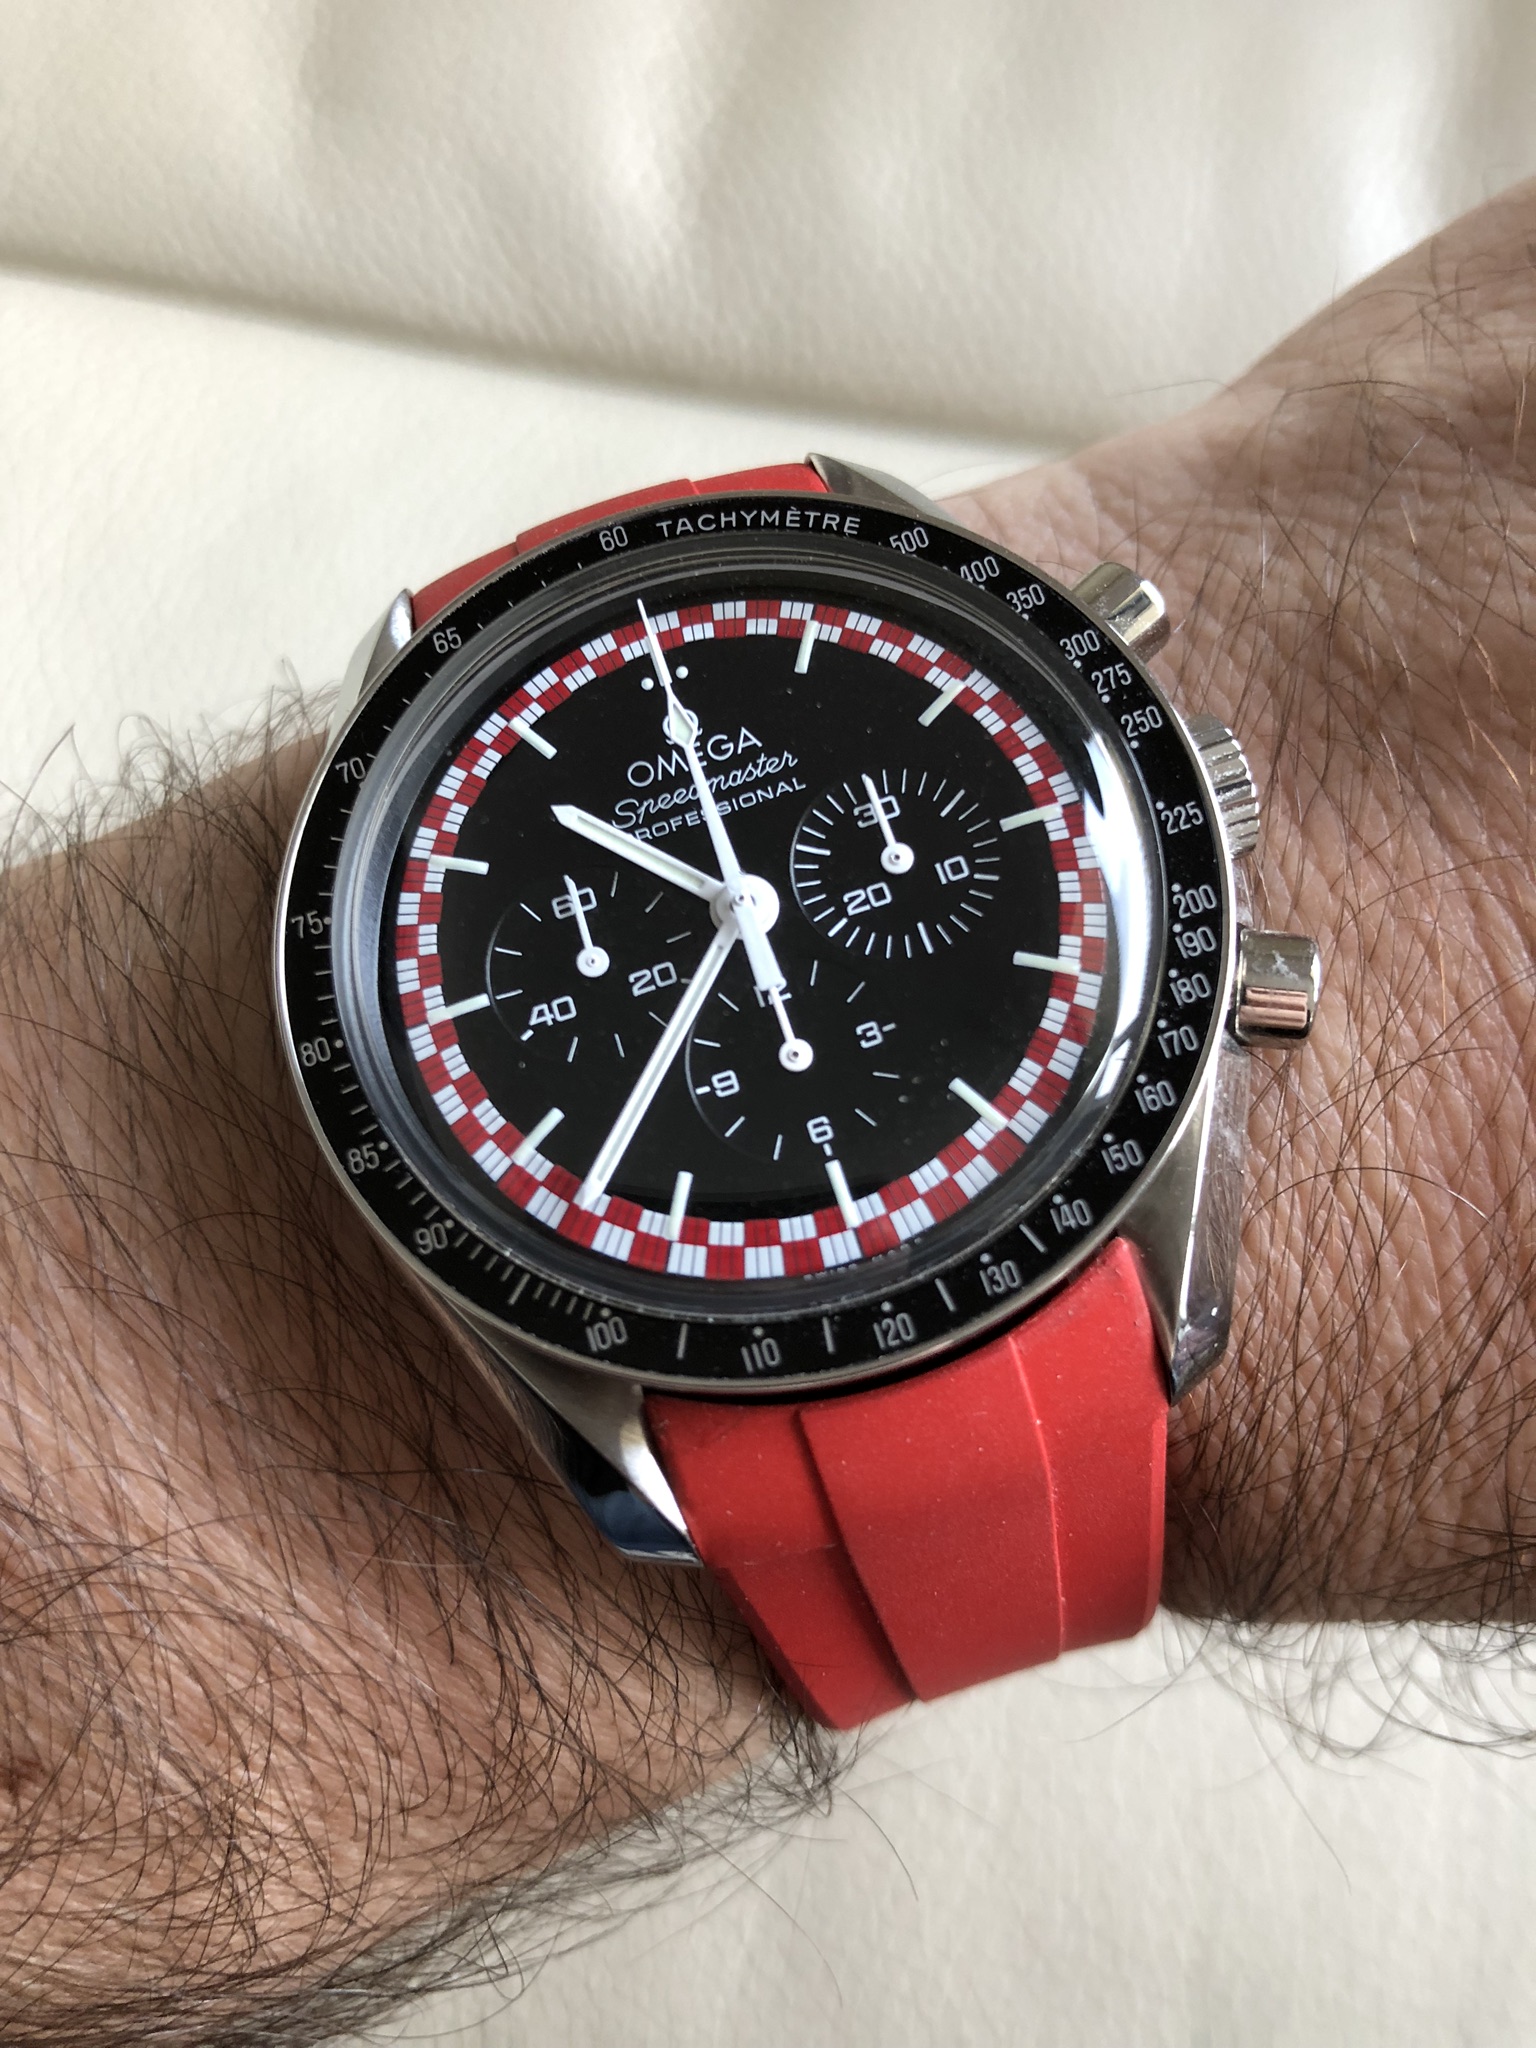 rubberB for rolex also fits Omega 